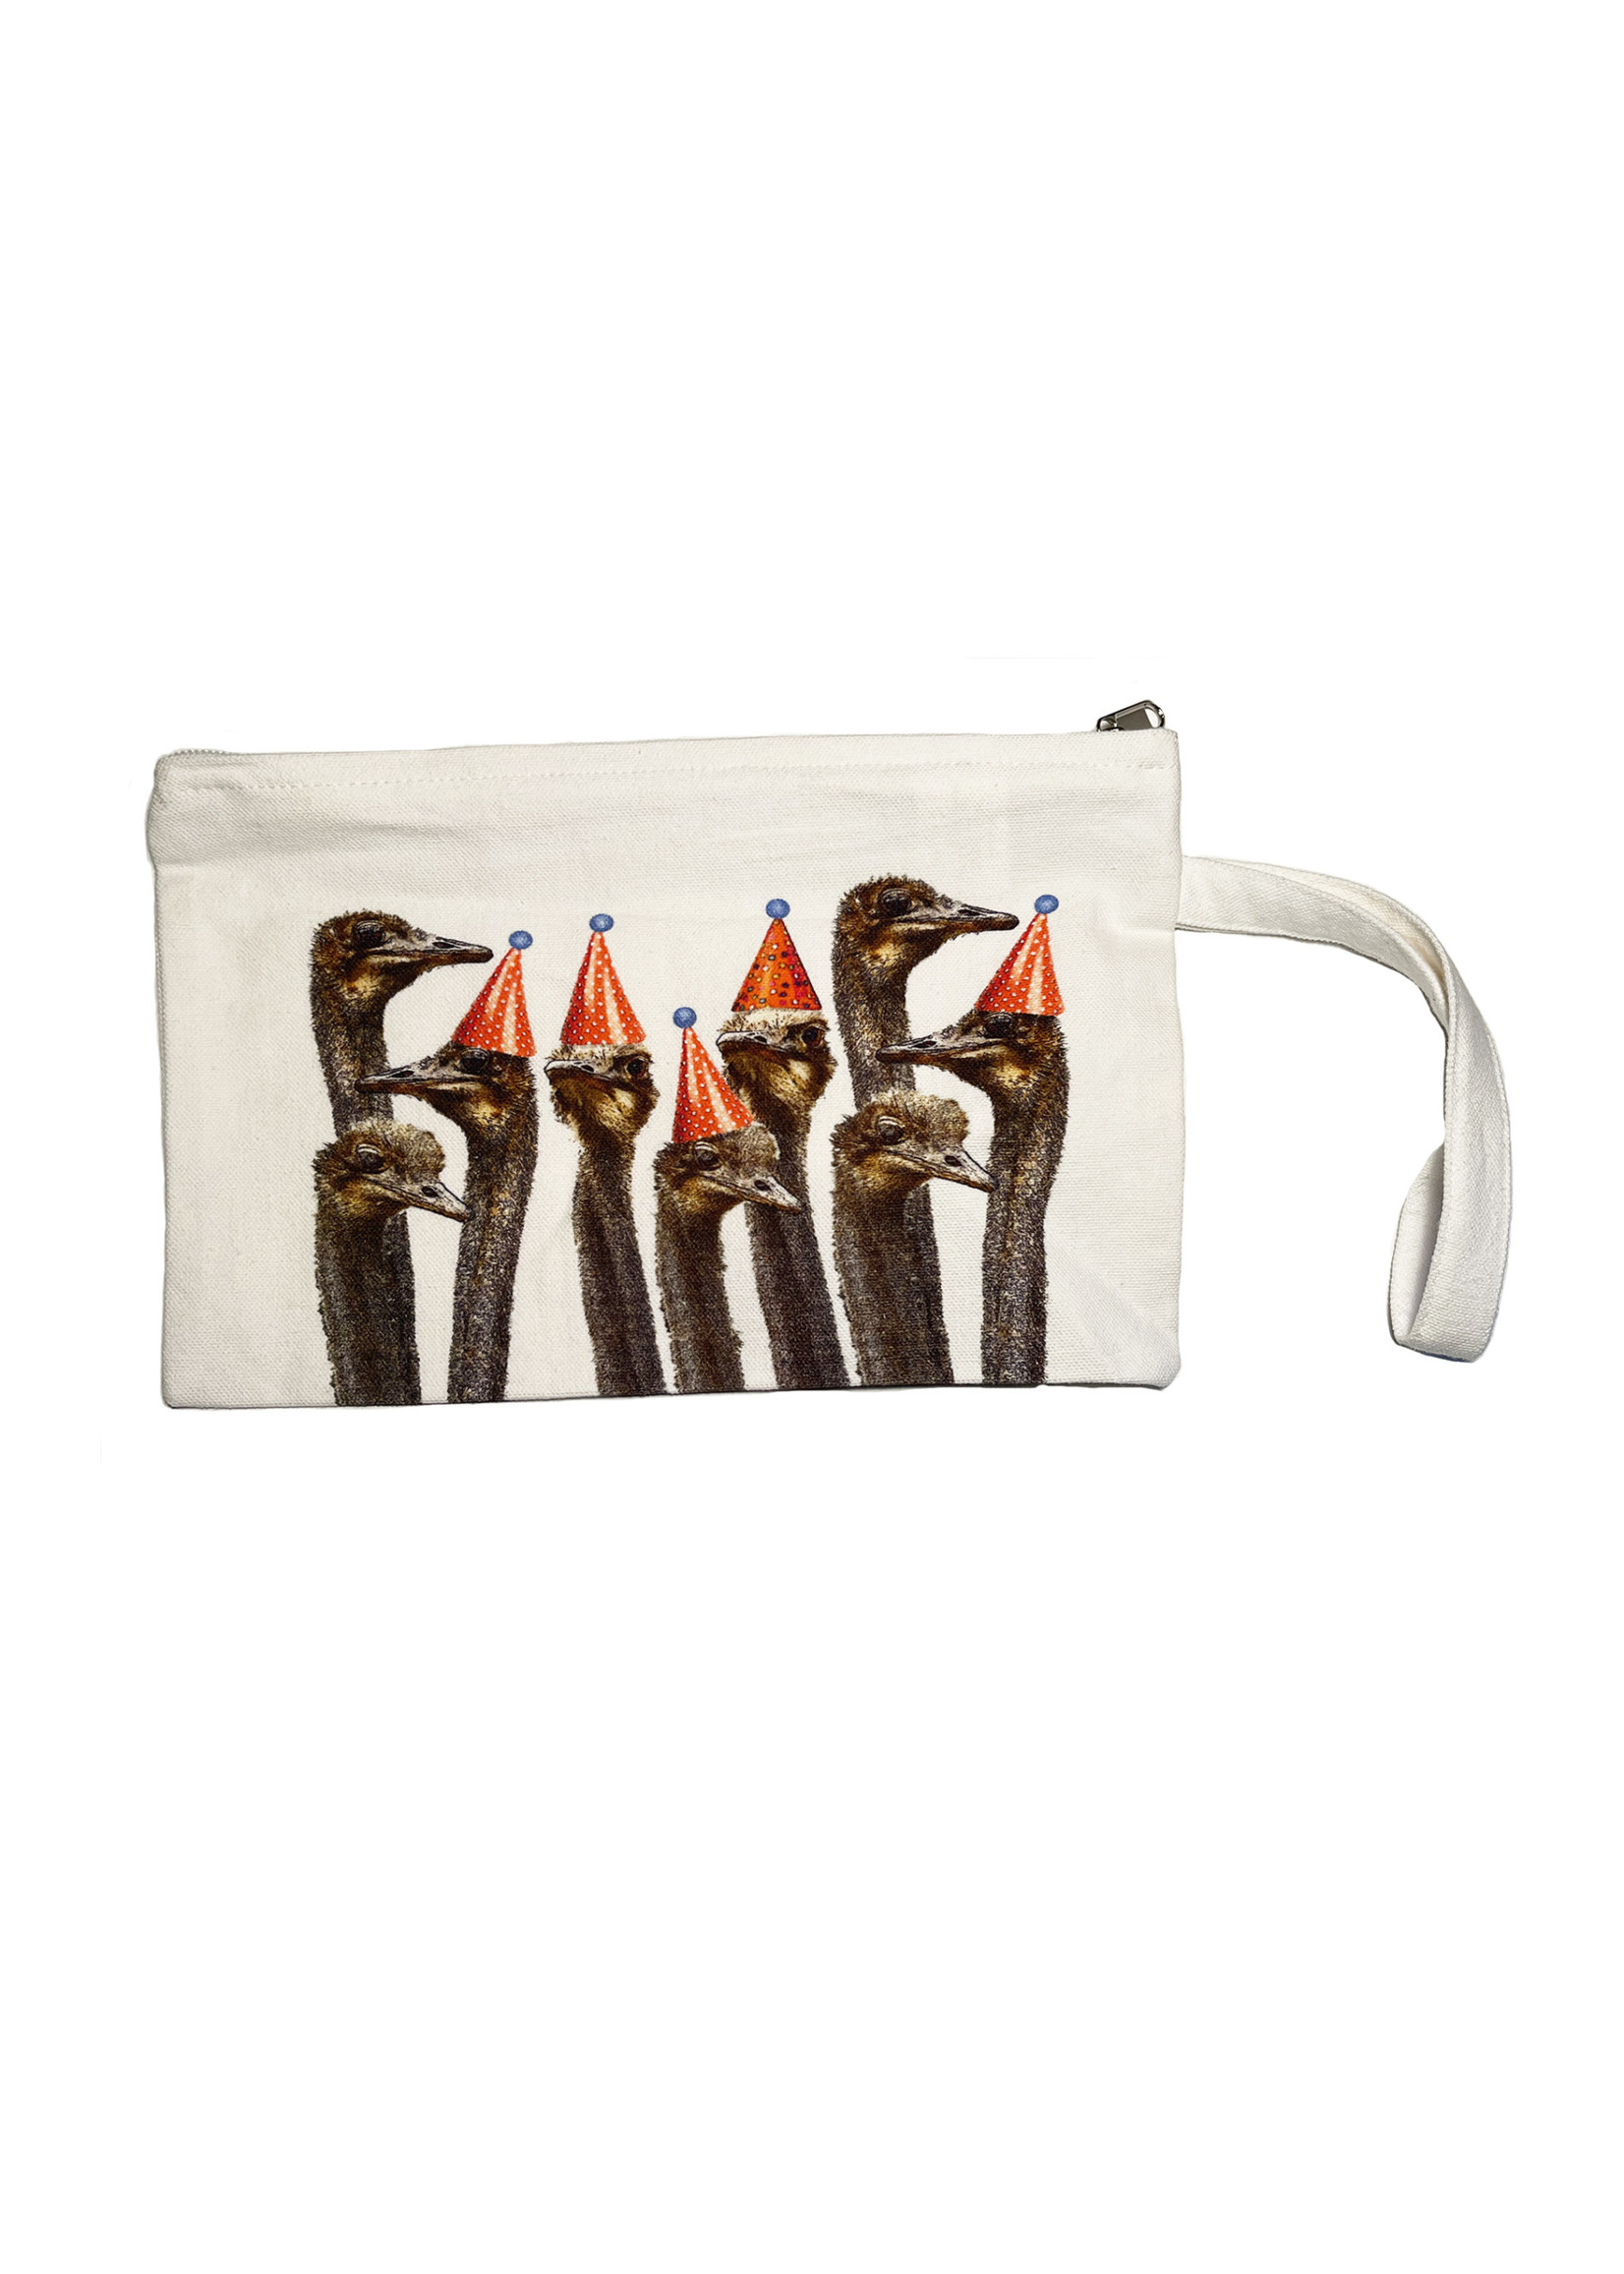 Alphie and Ollie ostriches in party hats wristlet